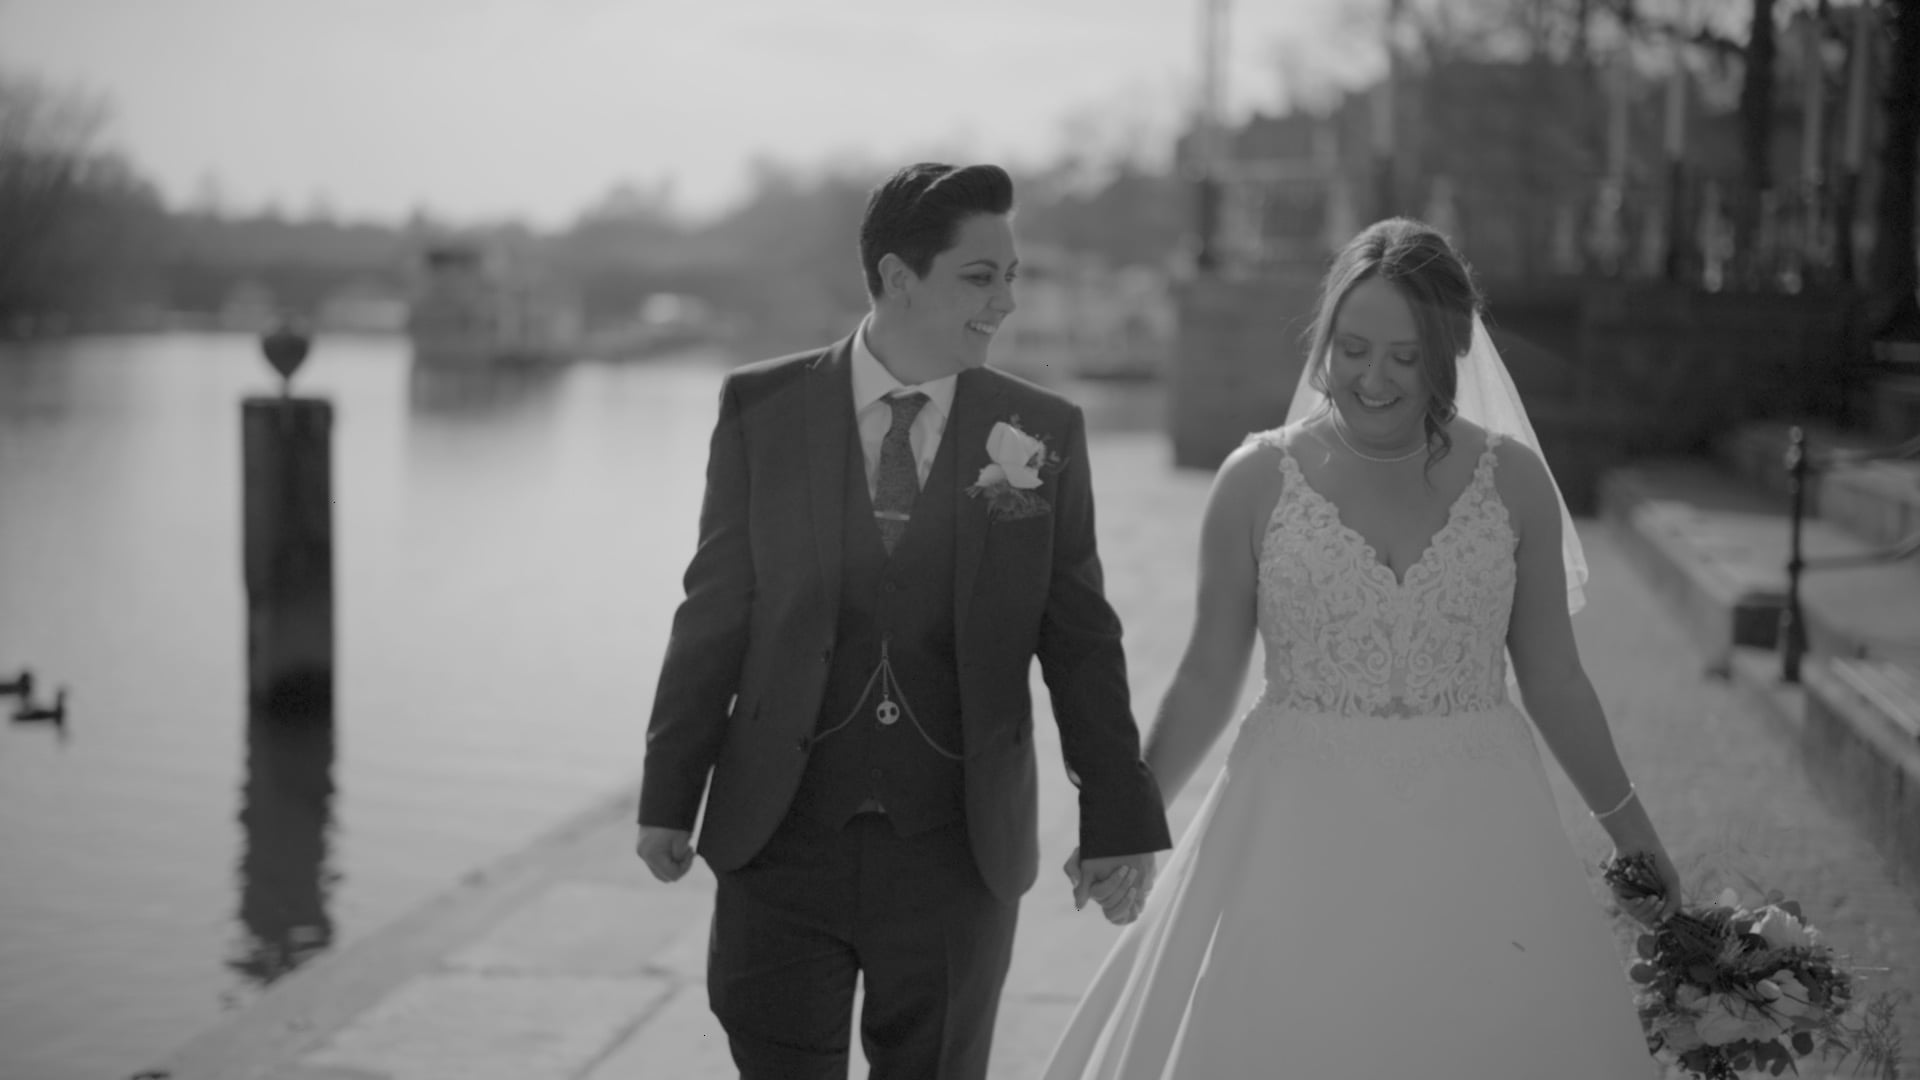 Donna & Sophie // Old Palace Chester // Highlight Film